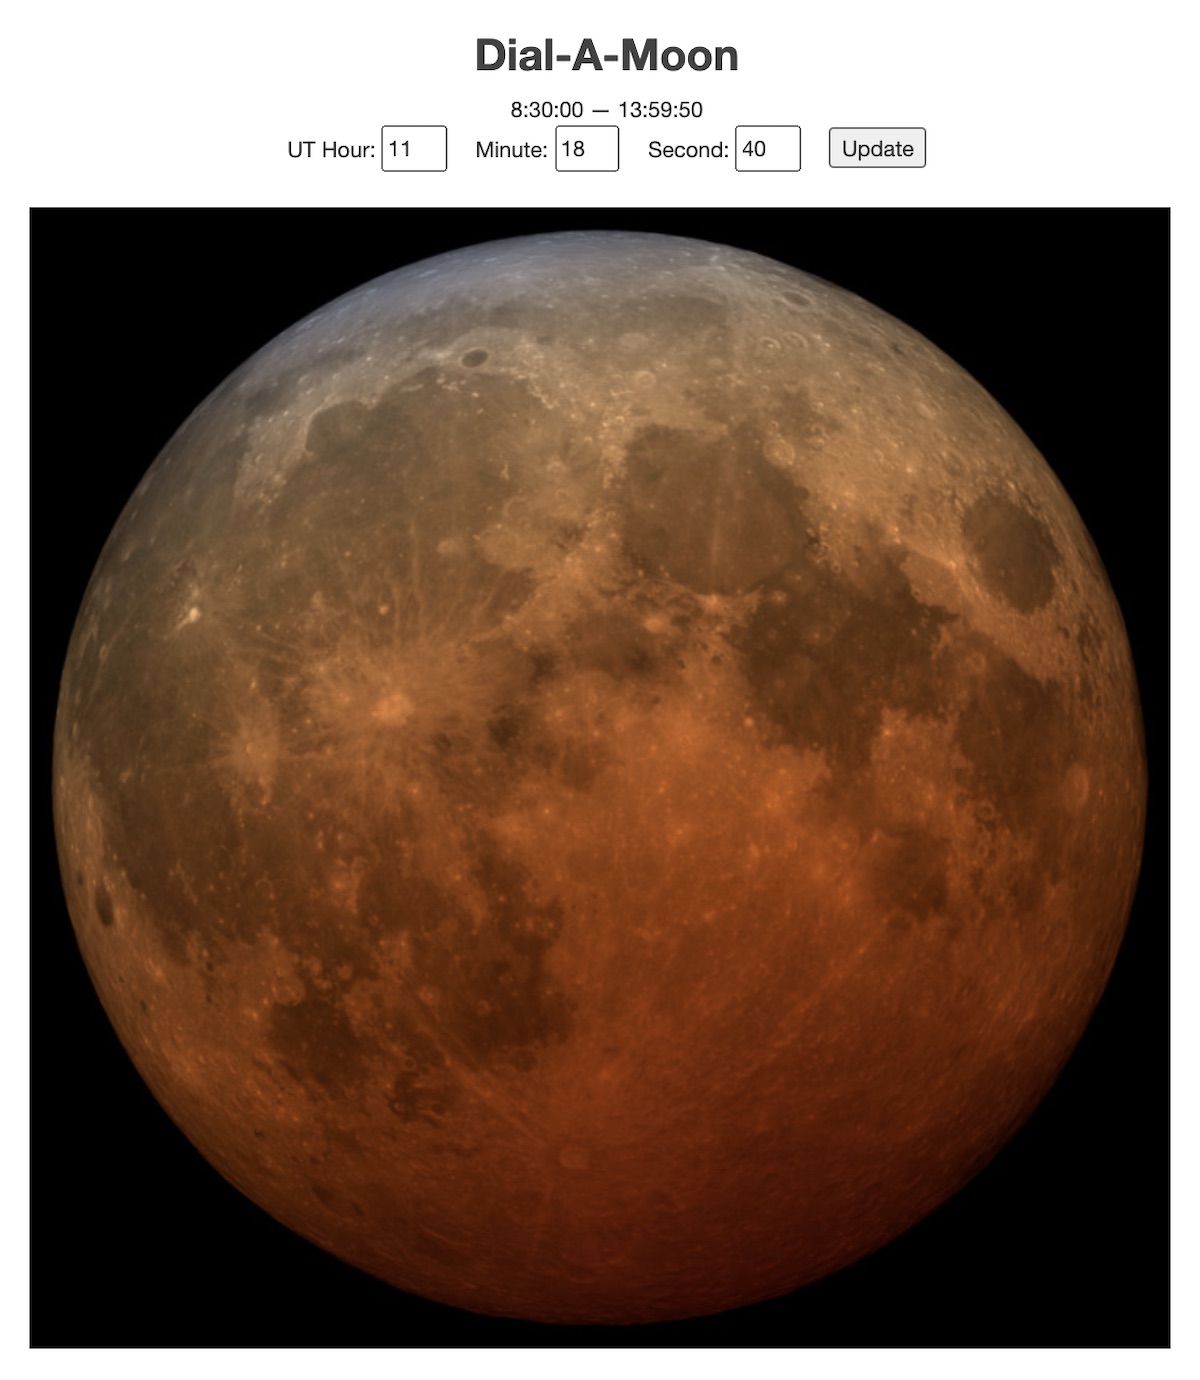 Close-up image of eclipsed Moon, in reddish shadow. The image is a screenshot of an interface titled Dial-A-Moon, at 11:18:40 UTC.